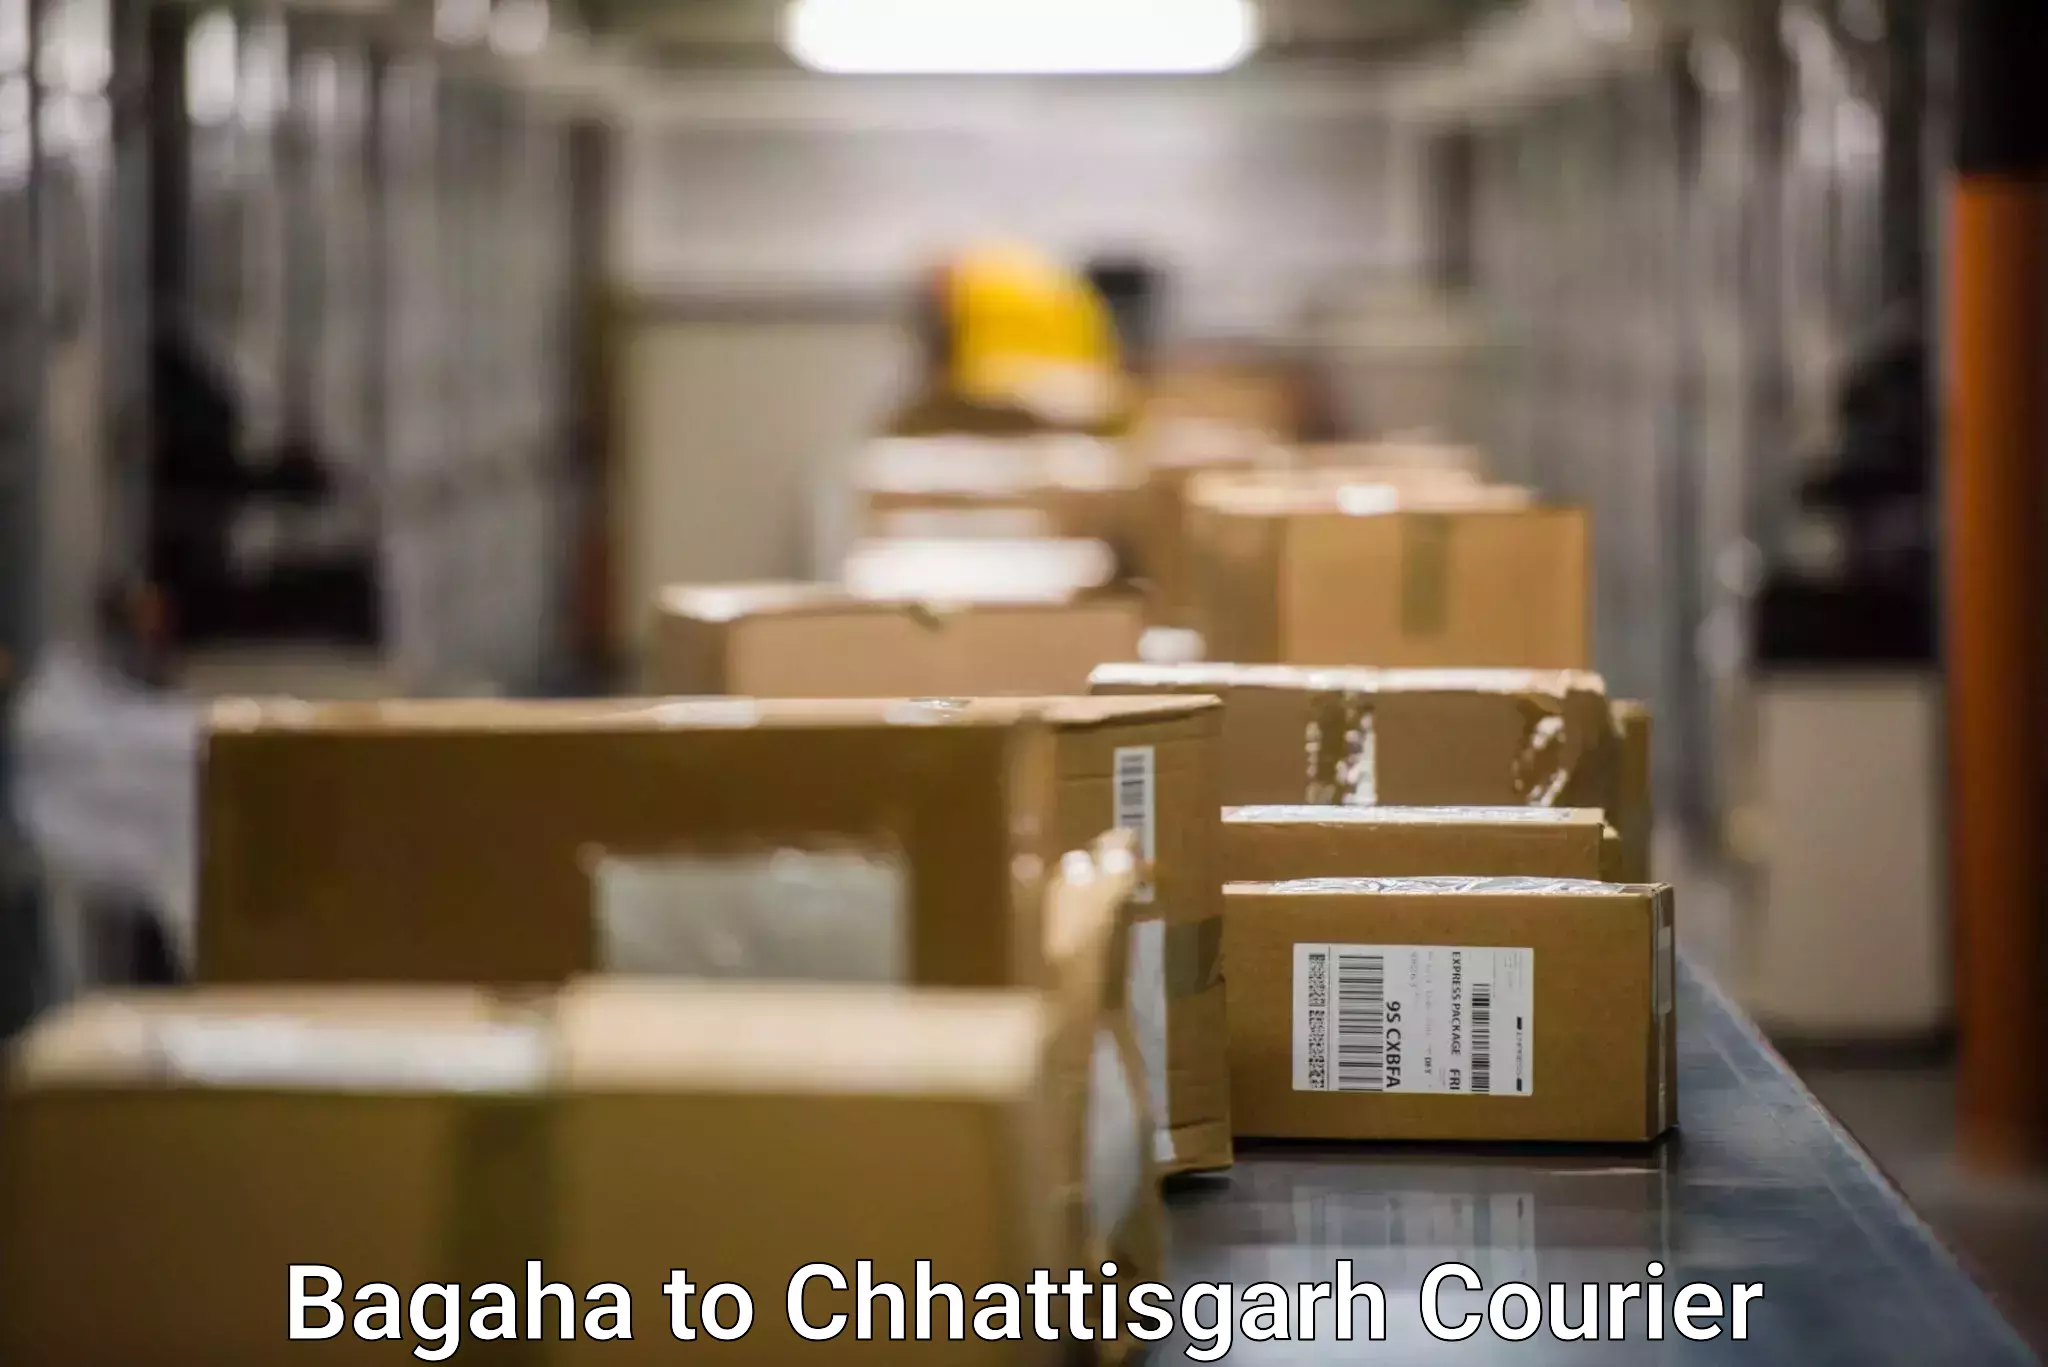 Customer-centric shipping in Bagaha to bagbahra